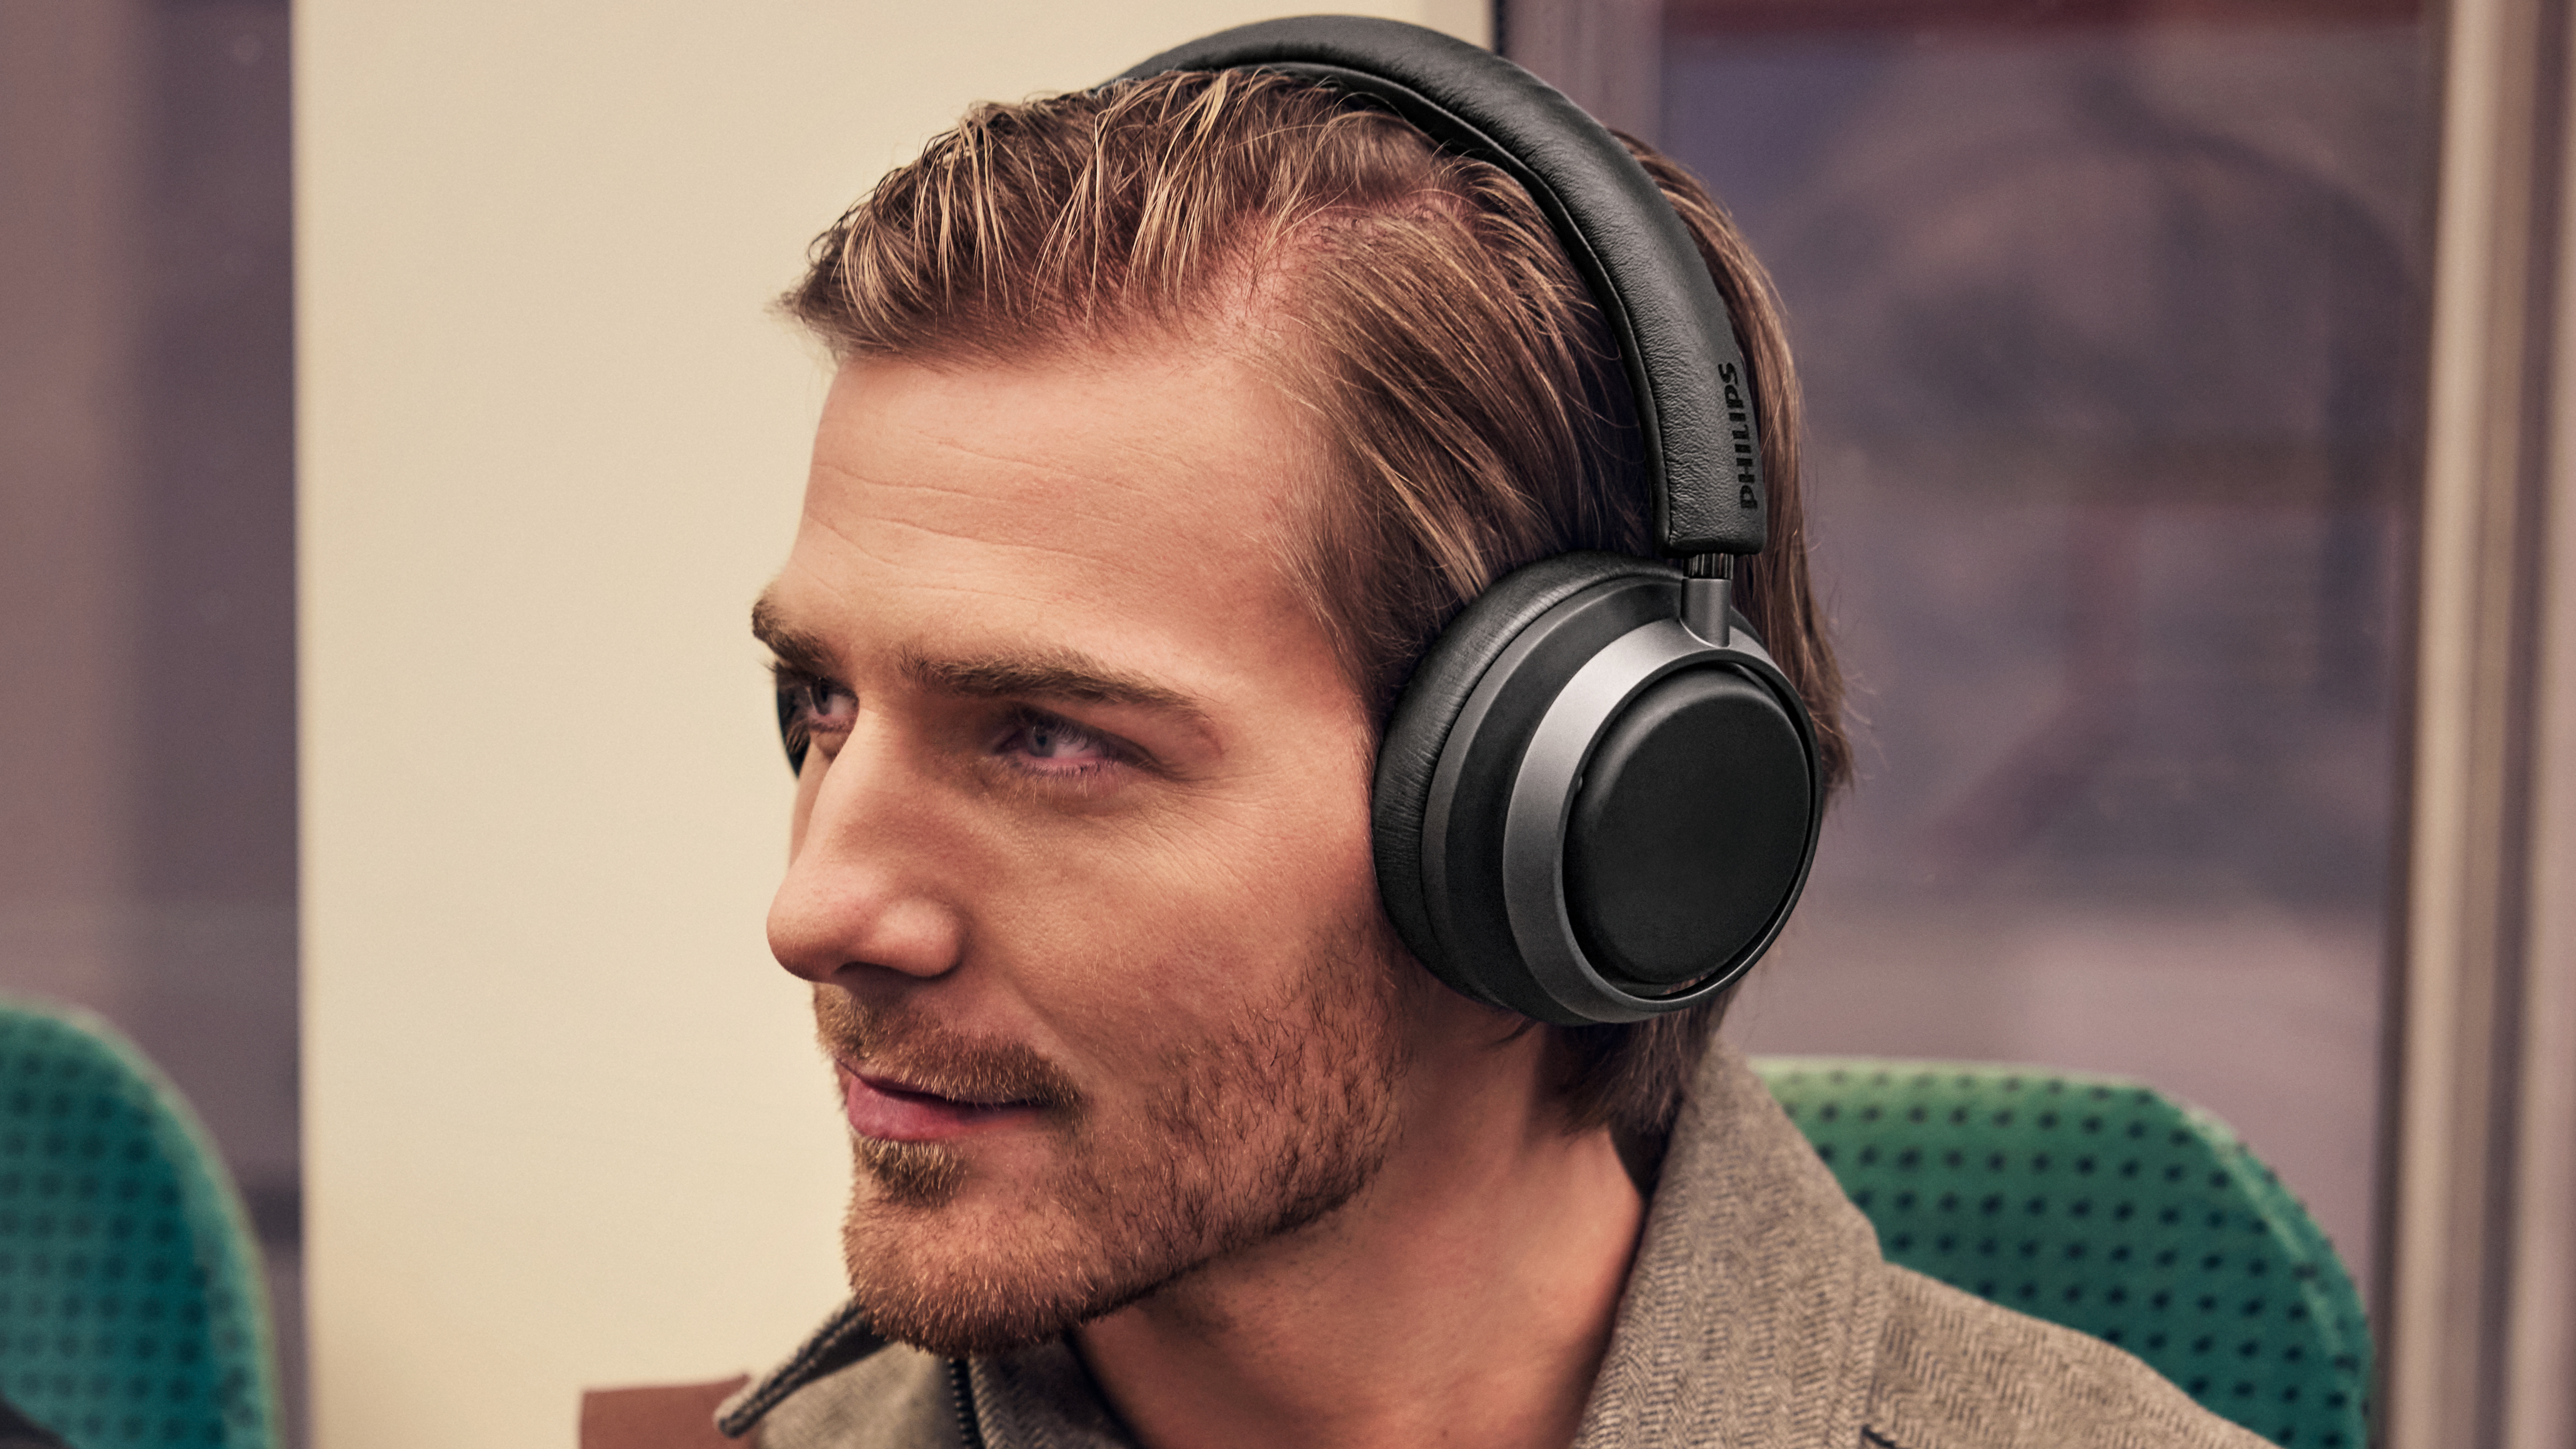 Philips Fidelio L4 review: rich and crisp audio quality with some